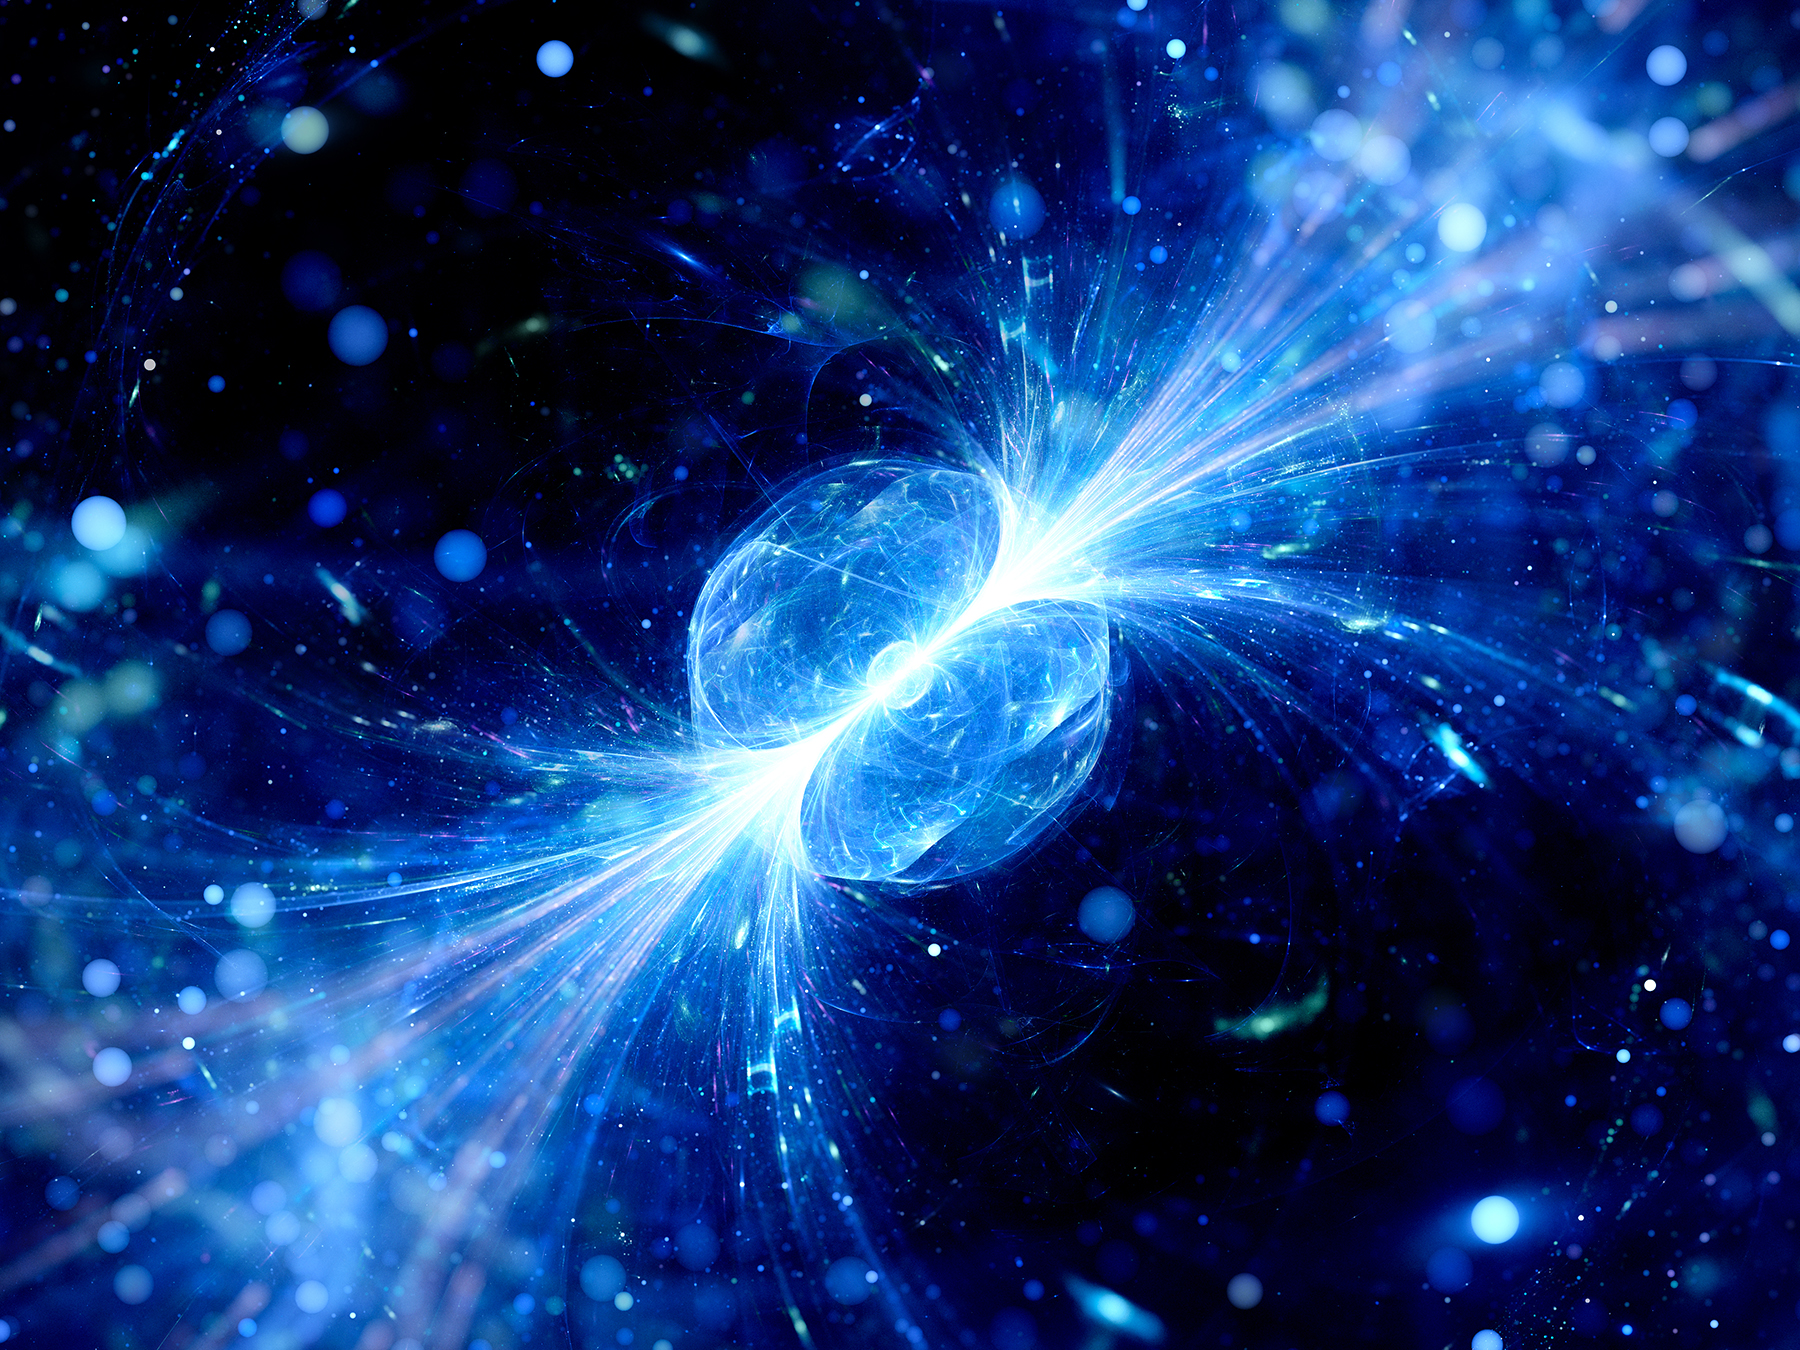 An artist's rendering of what a gamma ray burst may look like. There is a sphere of light with intense blue light focused on the diameter line of the sphere.